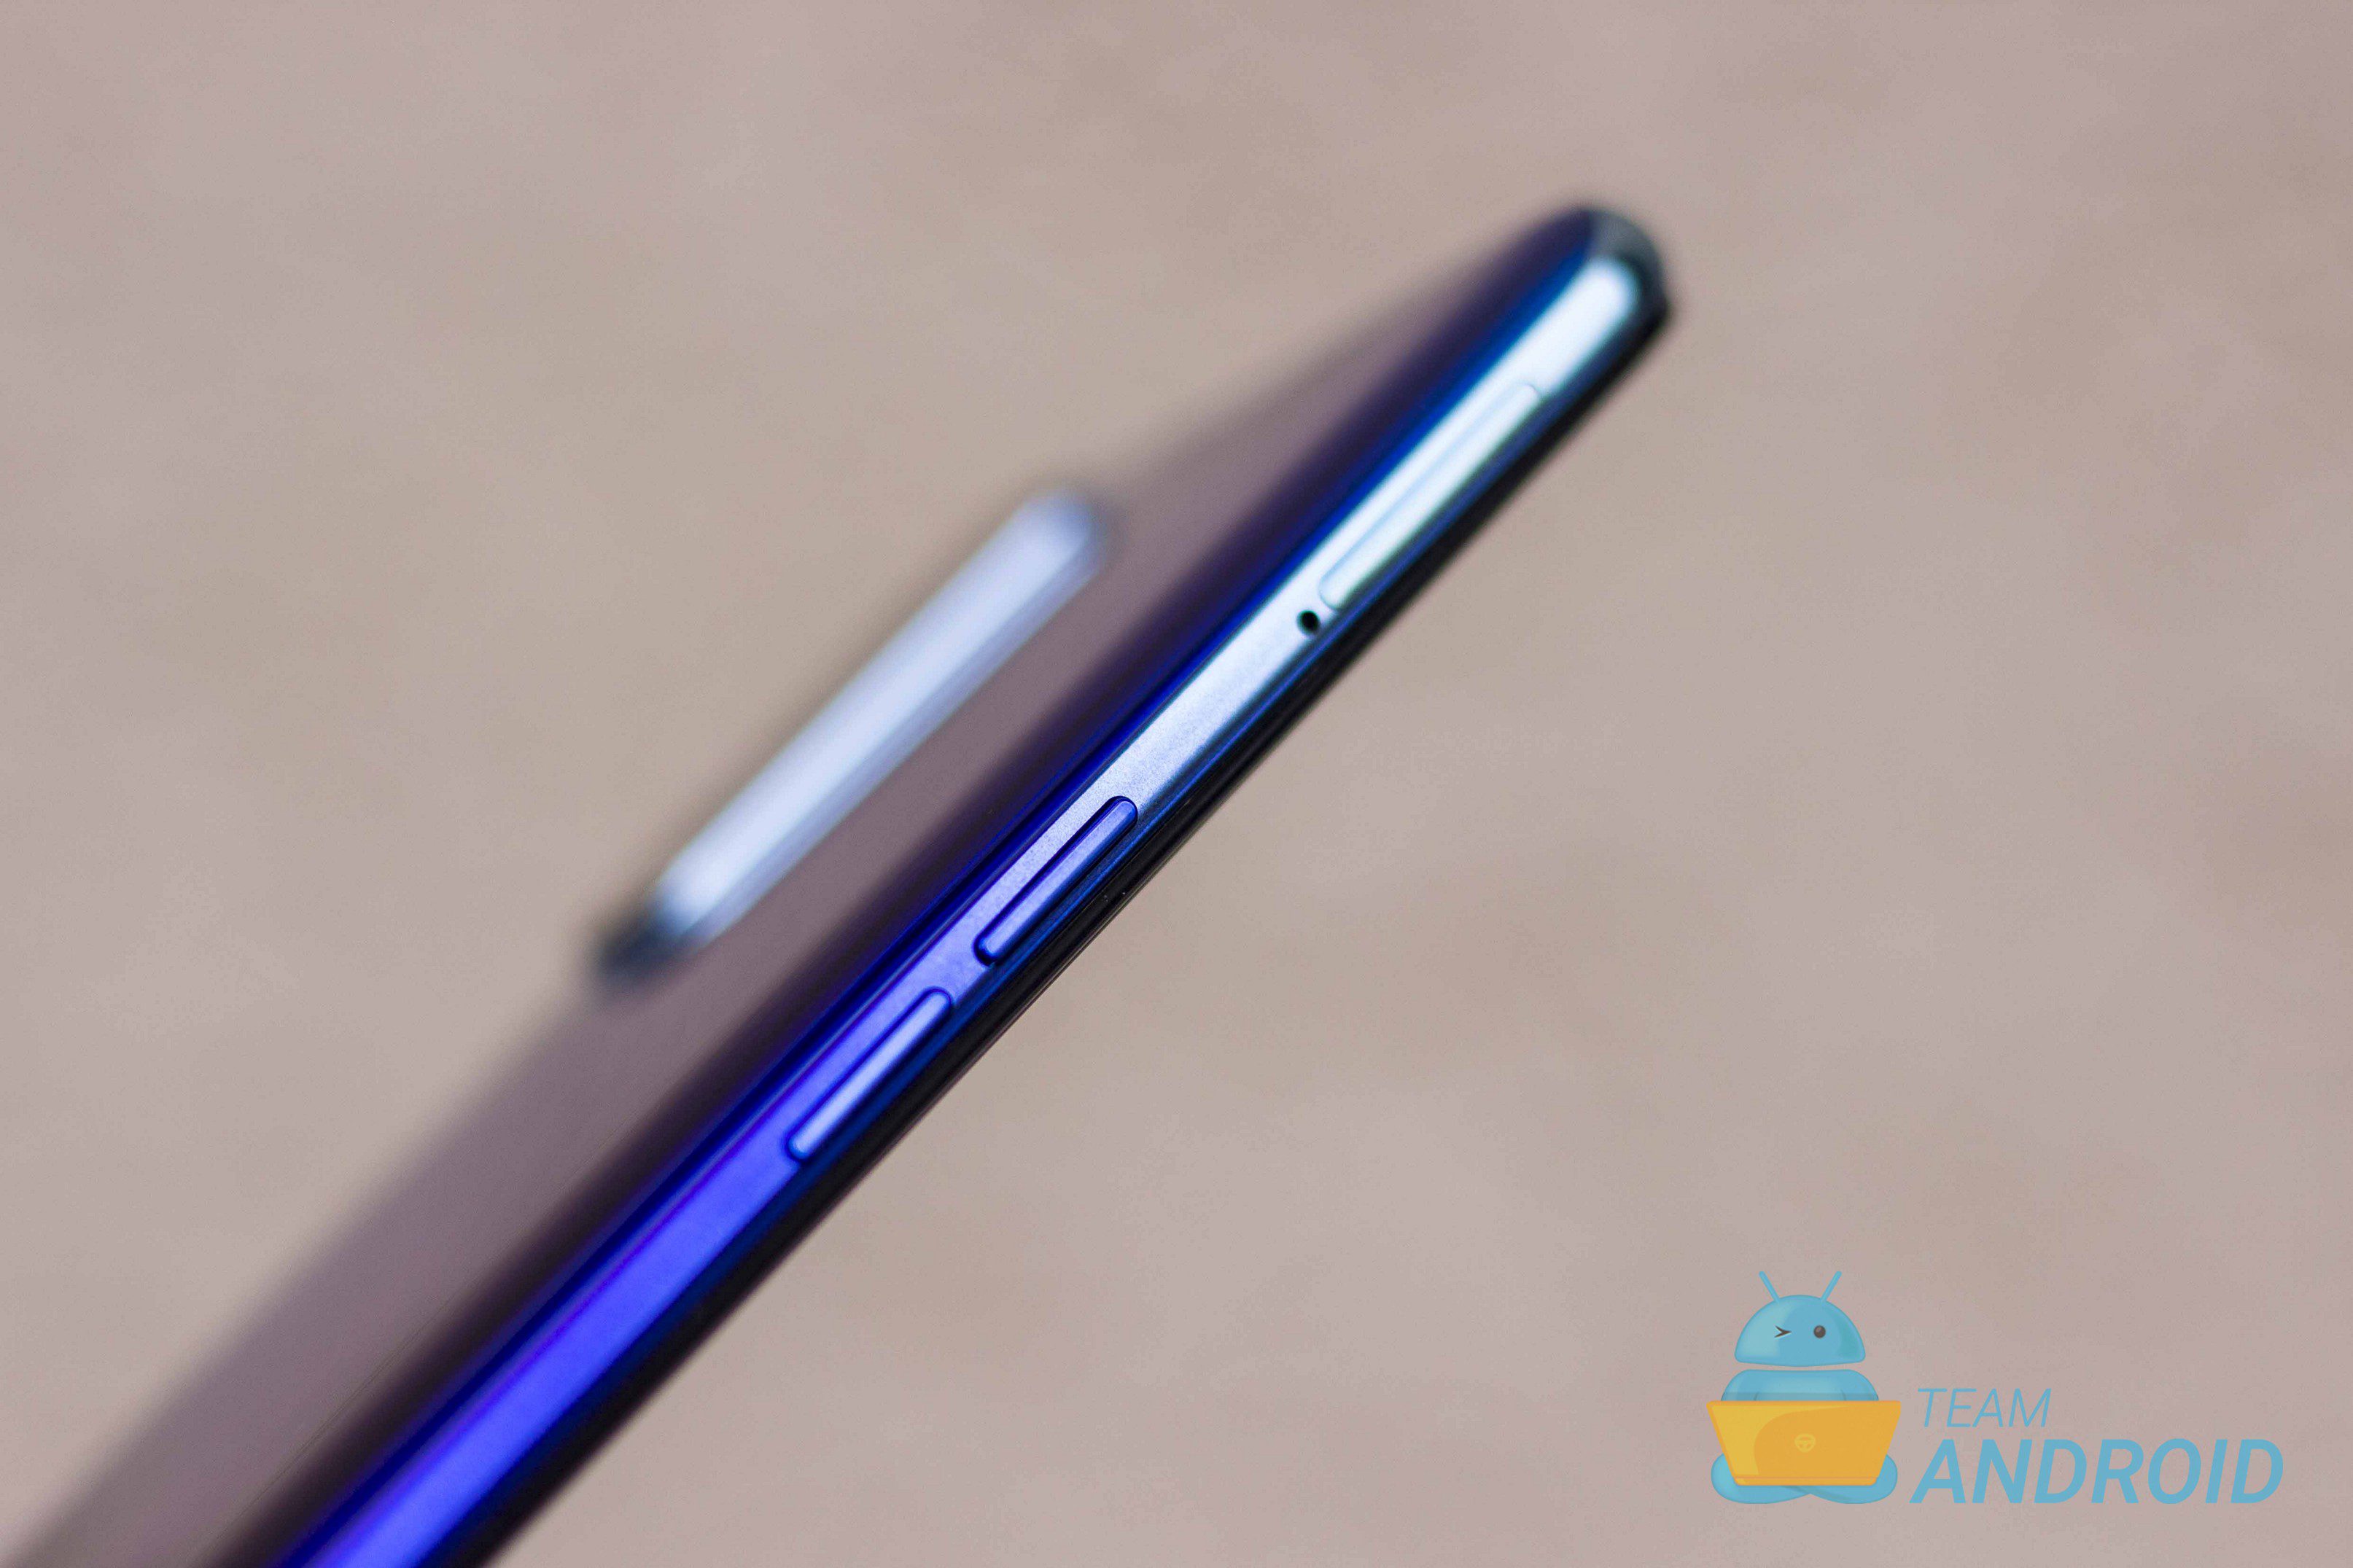 Oppo Reno 3 Pro Review: Is This a Midrange Flagship Phone? 37